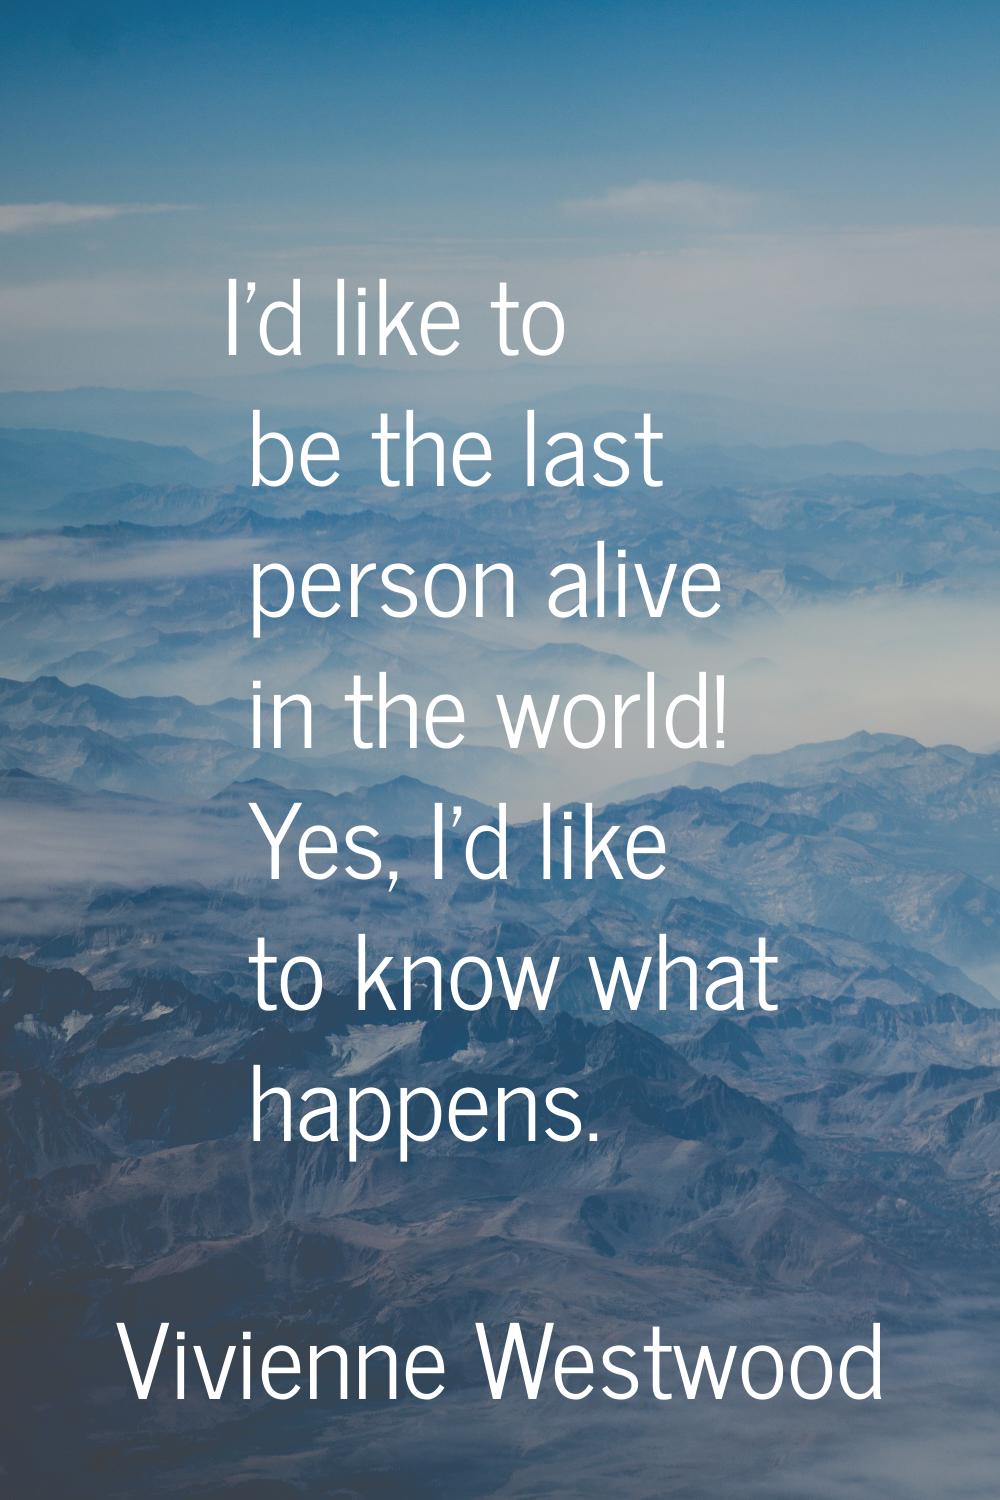 I'd like to be the last person alive in the world! Yes, I'd like to know what happens.